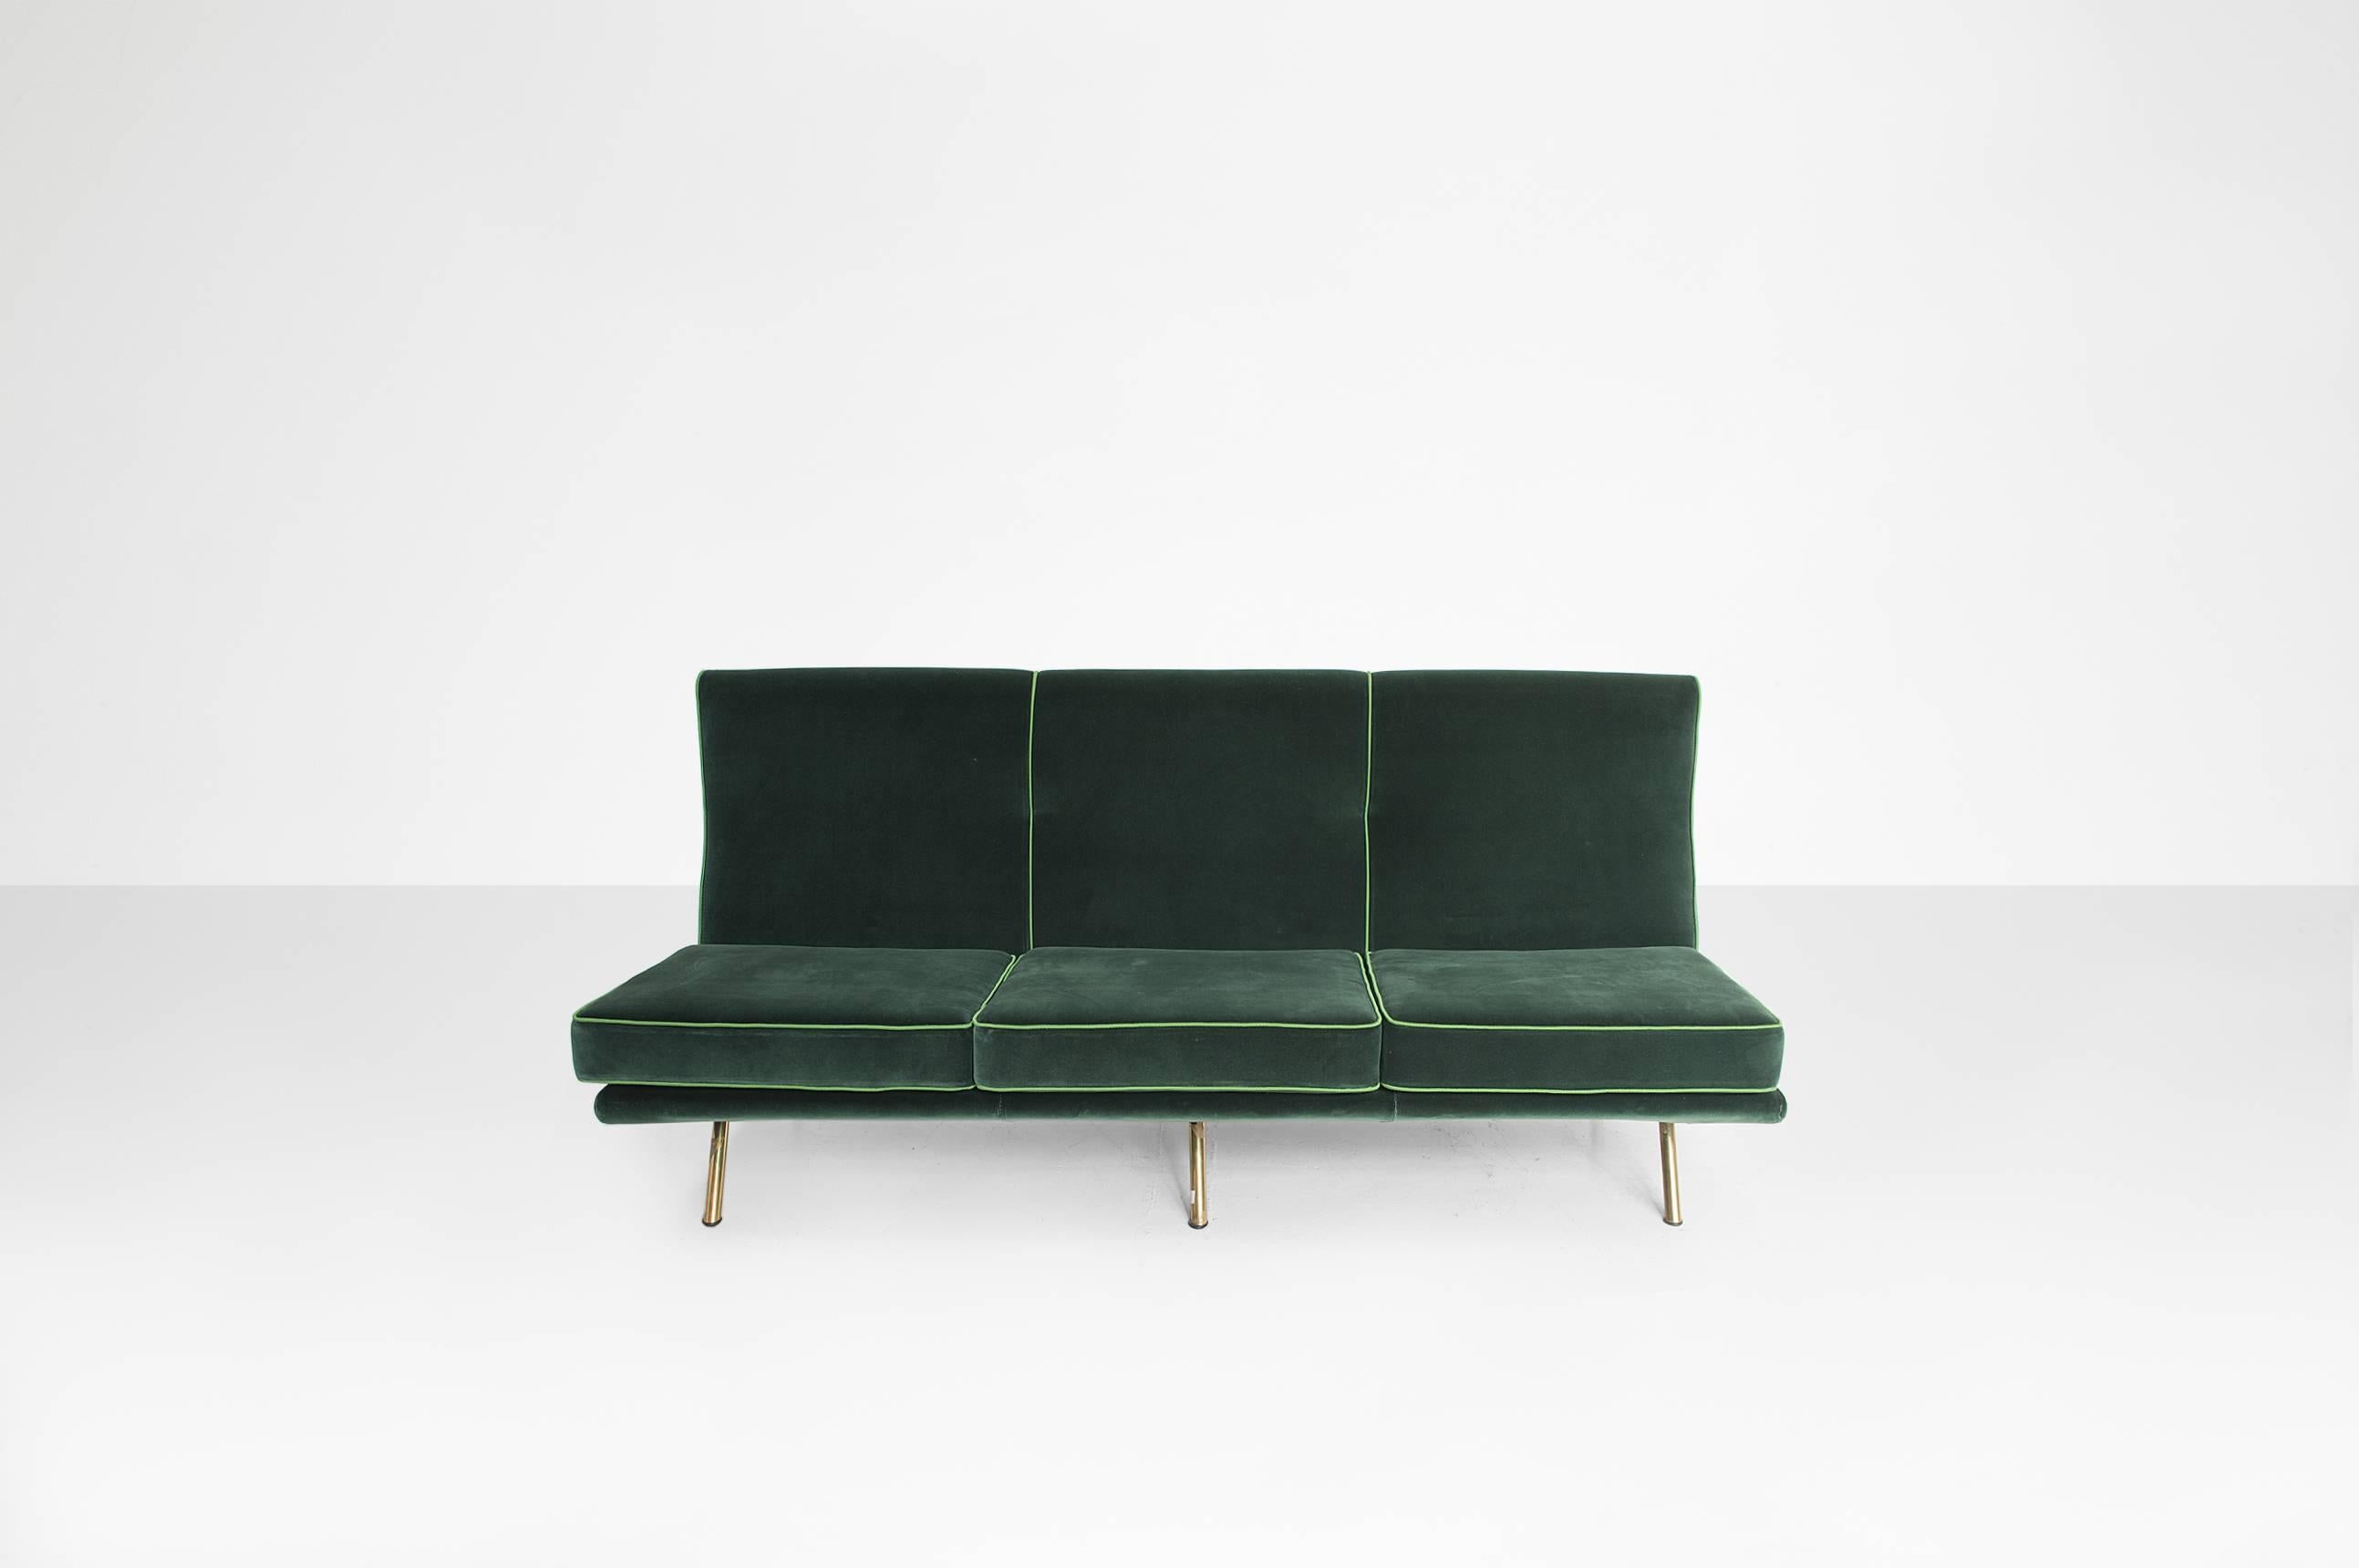 Marco Zanuso (1916-2001).

Three seats sofa model “X Triennale.”
Manufactured by Arflex,
Italy, 1951.
Wood and metal structure, velvet upholstery.

Measurements:
182 cm x 75 cm x 87 H cm,
71.6 in x 29.5 in x 34.2 H